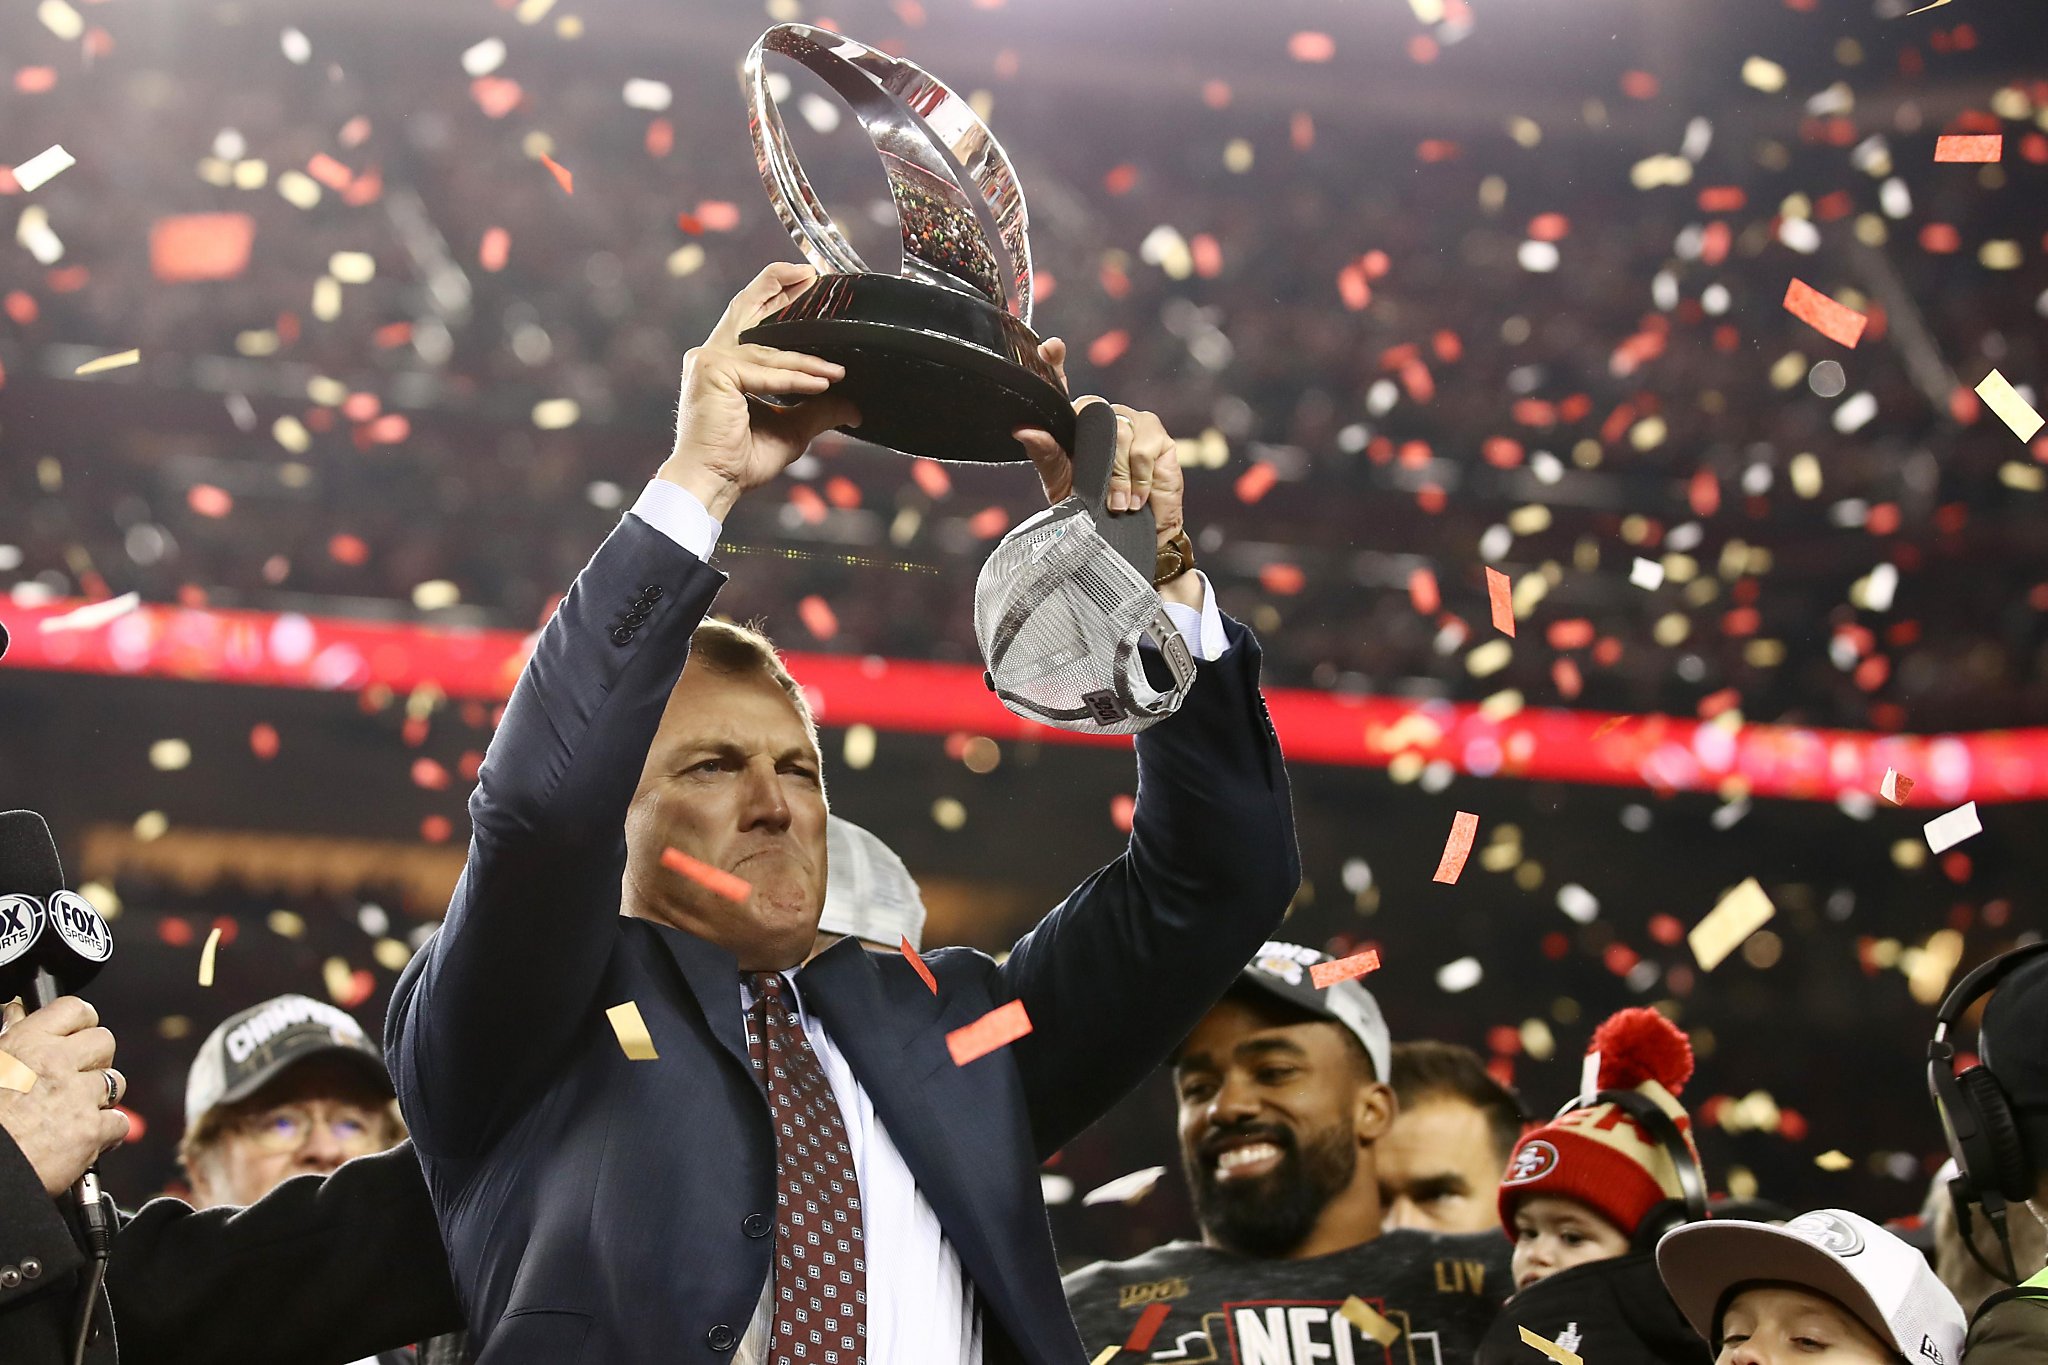 49ers' general manager John Lynch leads his team from 'Mobile to Miami'